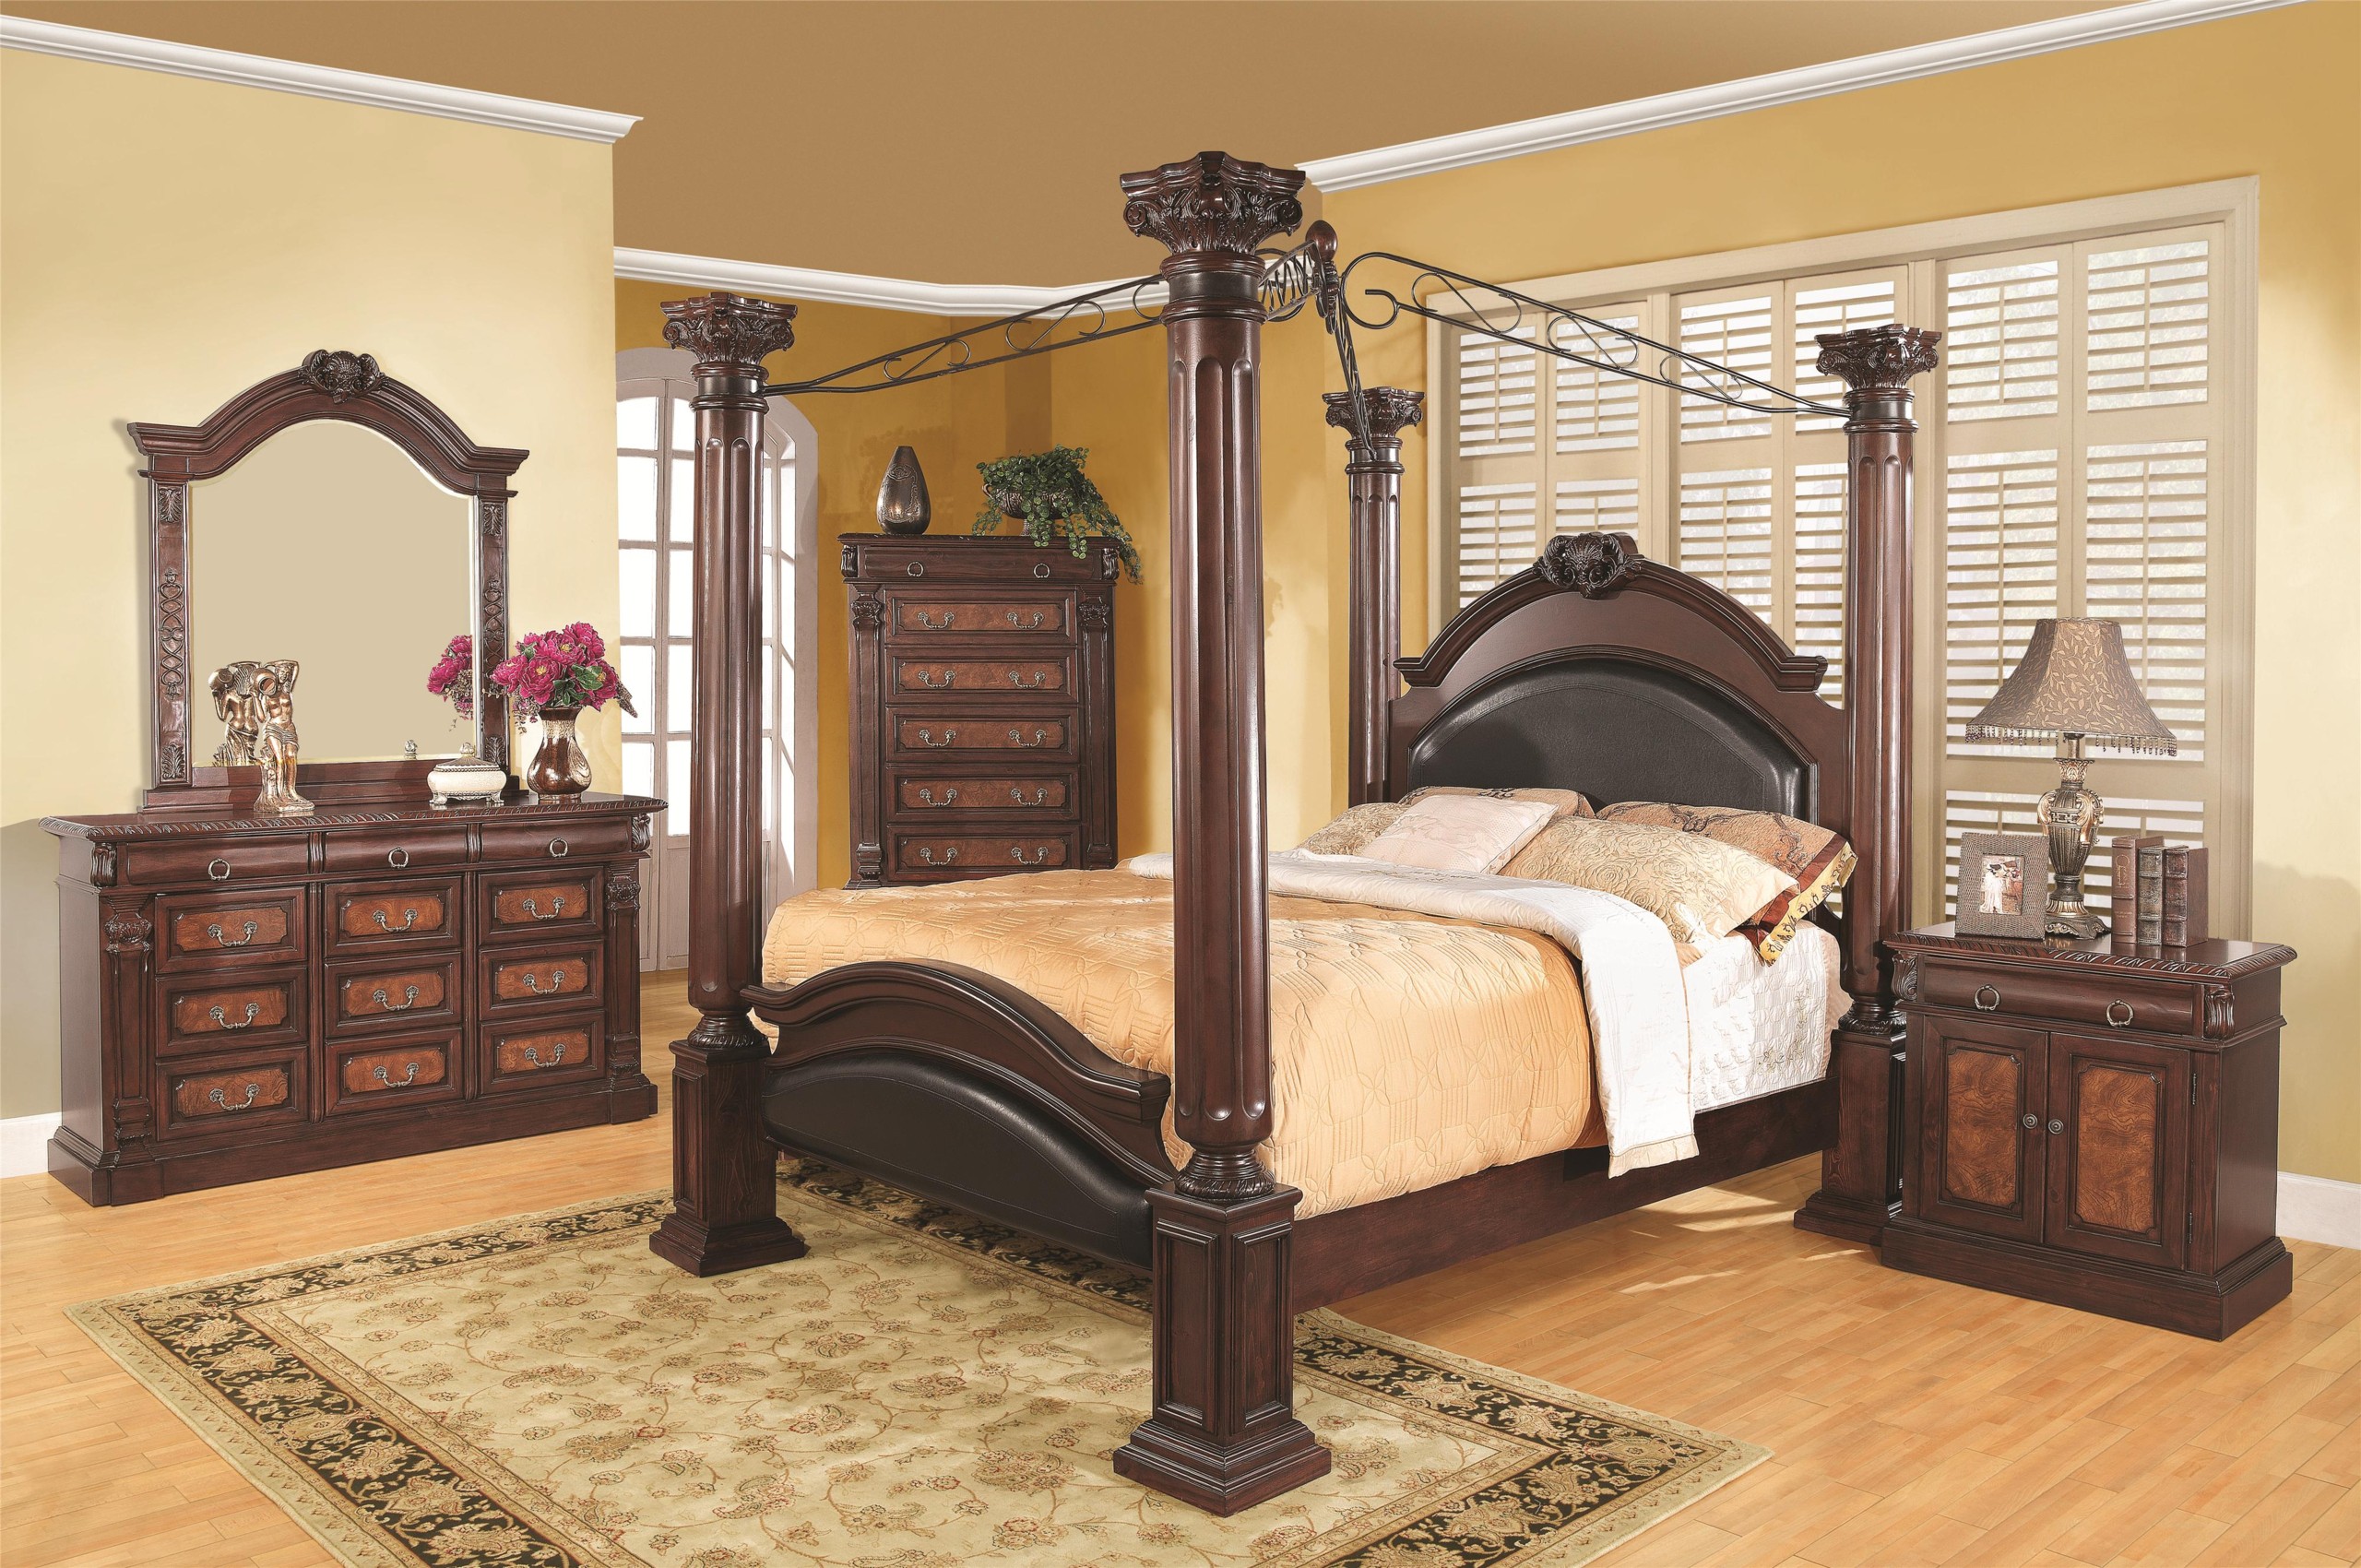 Grand Prado Collection 4 Piece Eastern King Size Bedroom Group